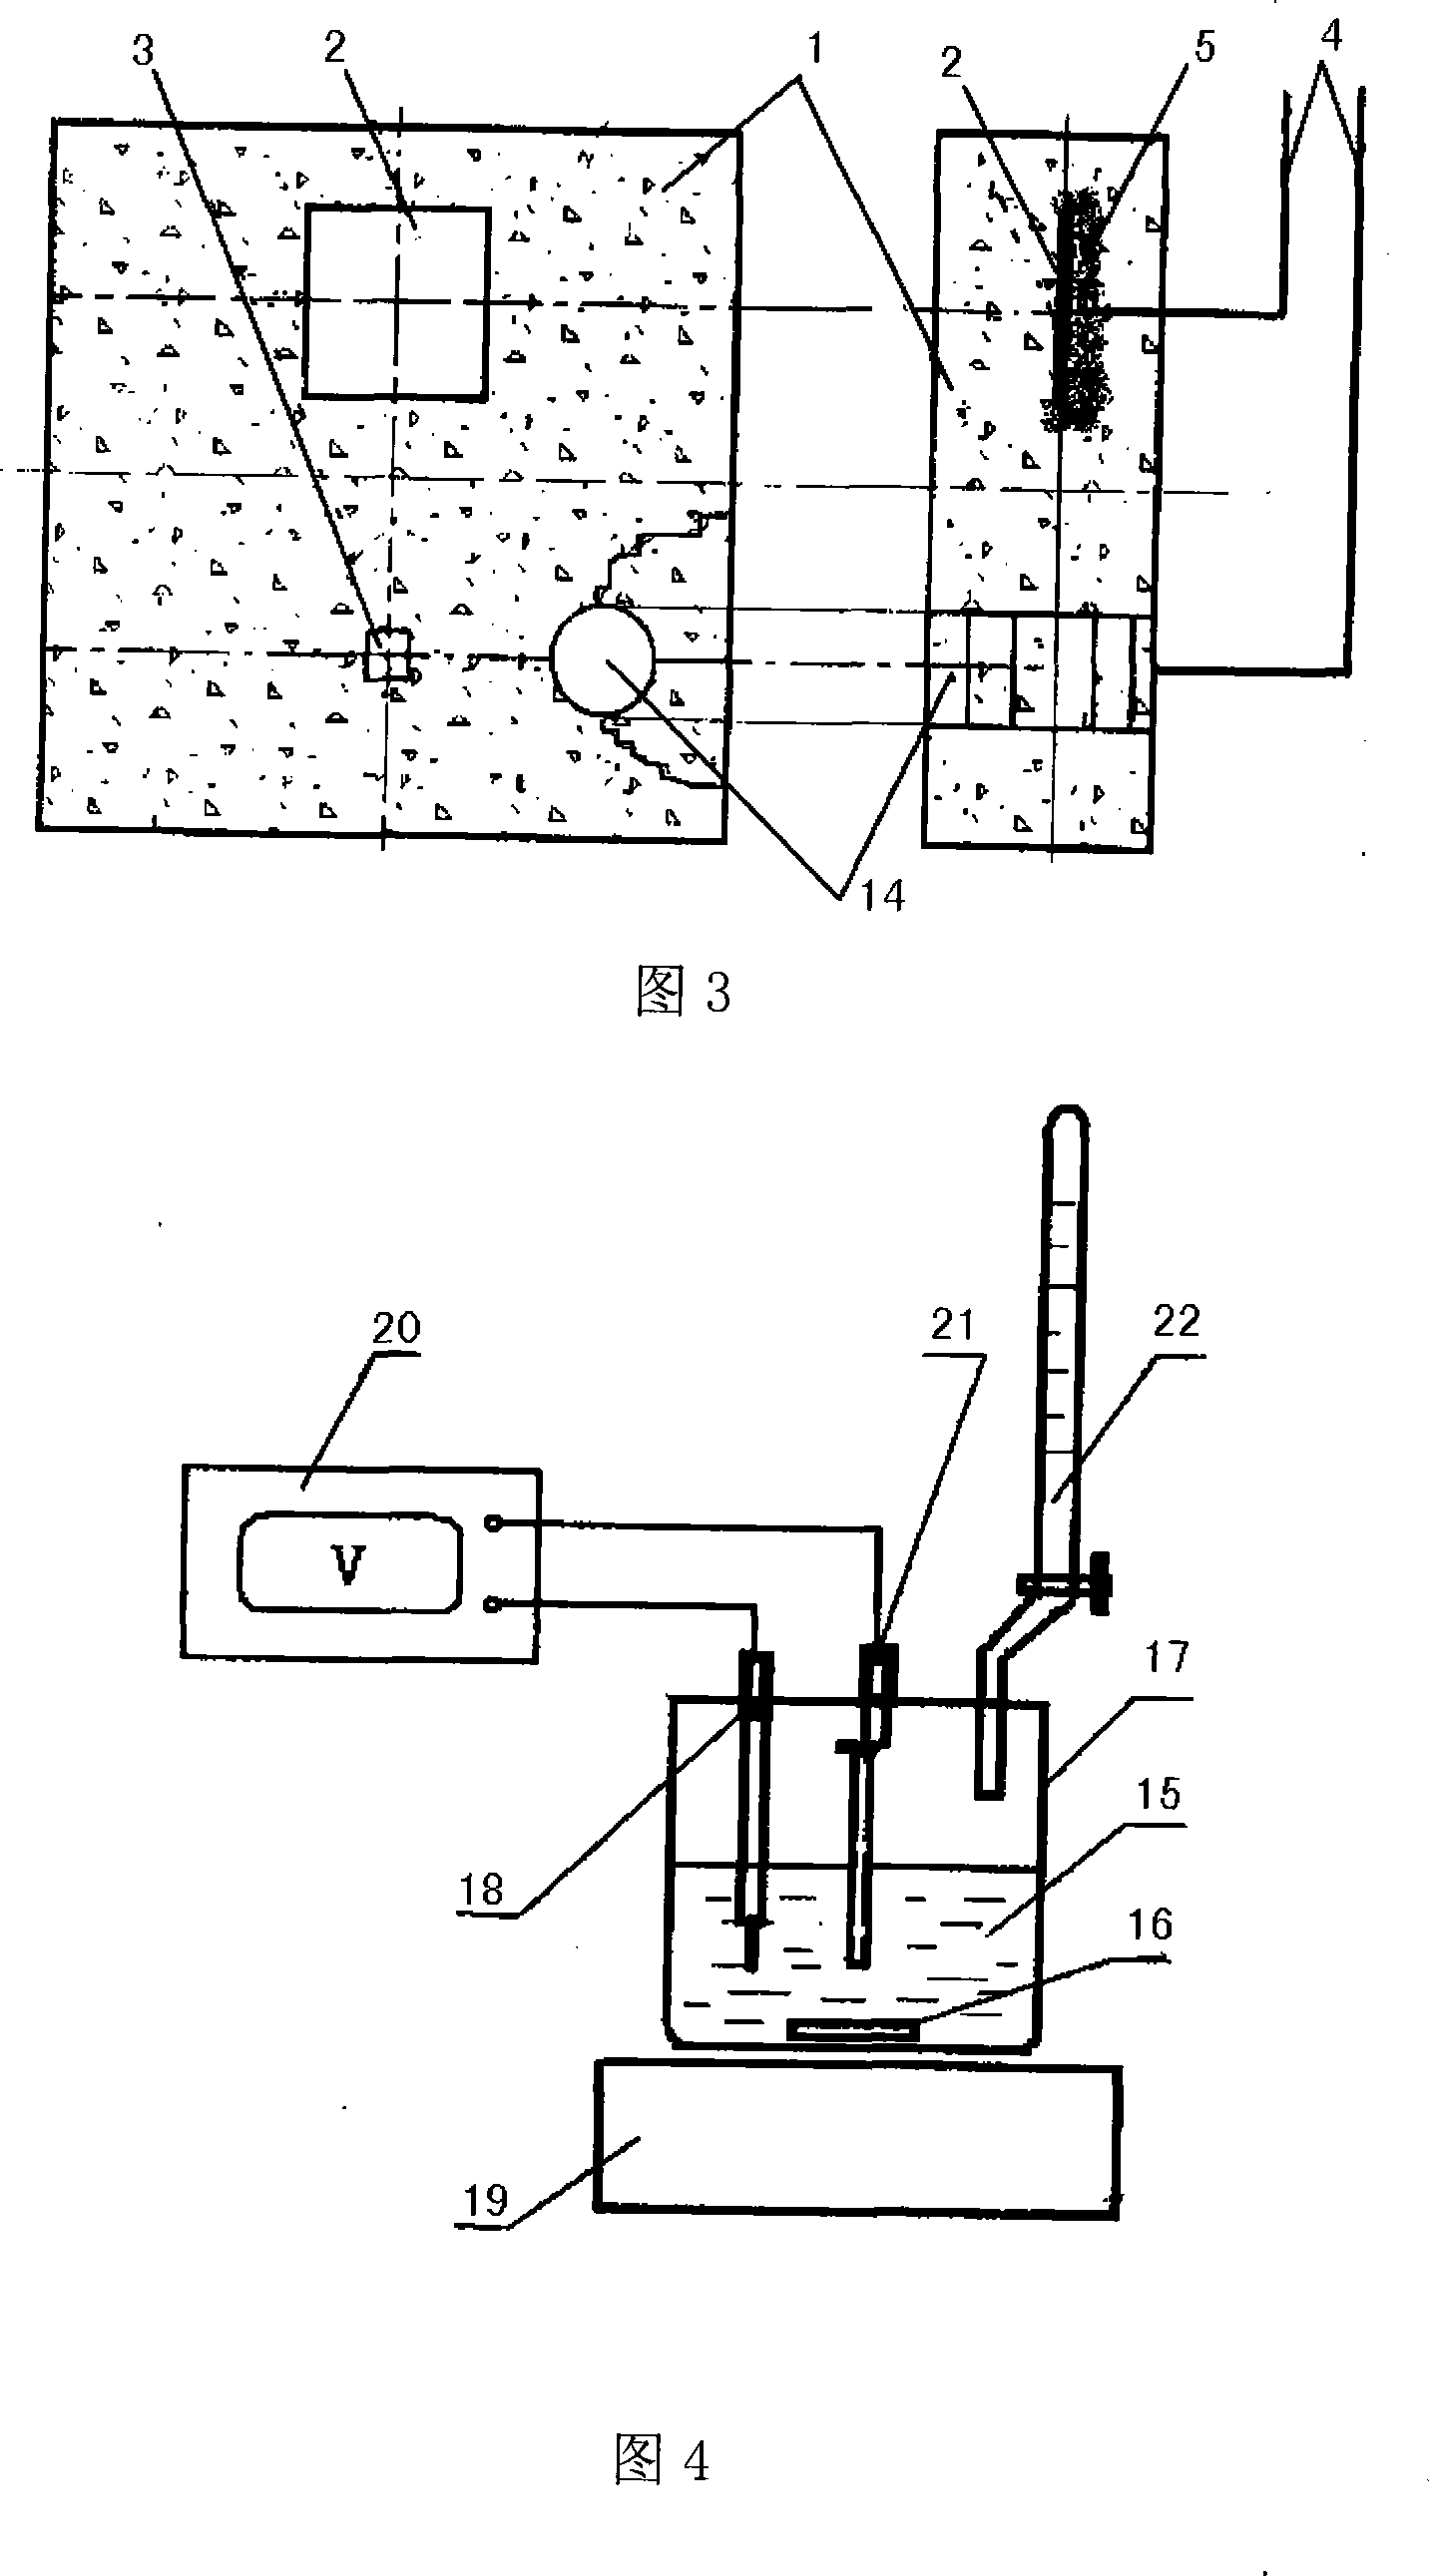 Method for rapidly measuring reinforcing steel tarnishing criticality chlorine ion concentration